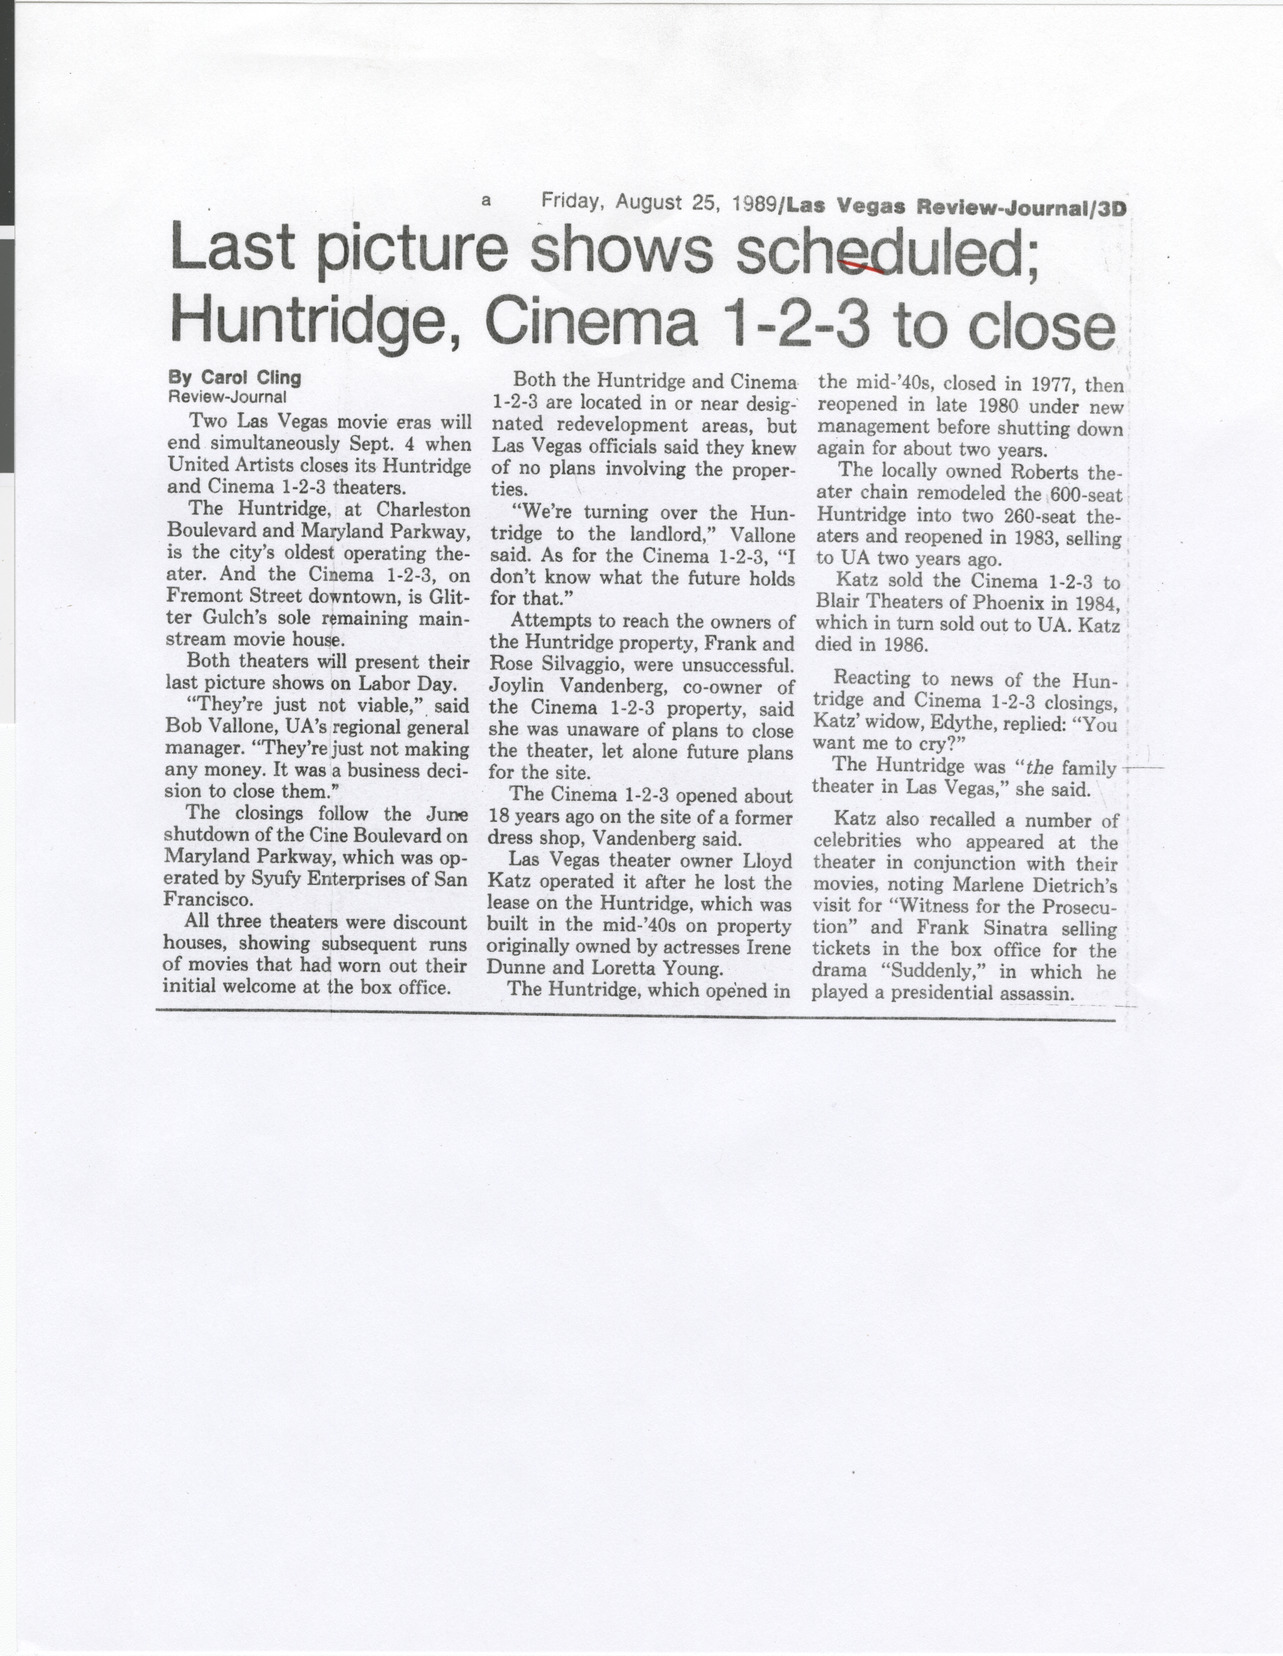 Newspaper clipping, Last picture shows scheduled, Huntridge, Cinema 1-2-3 to close, Las Vegas Review-Journal, August 25, 1989